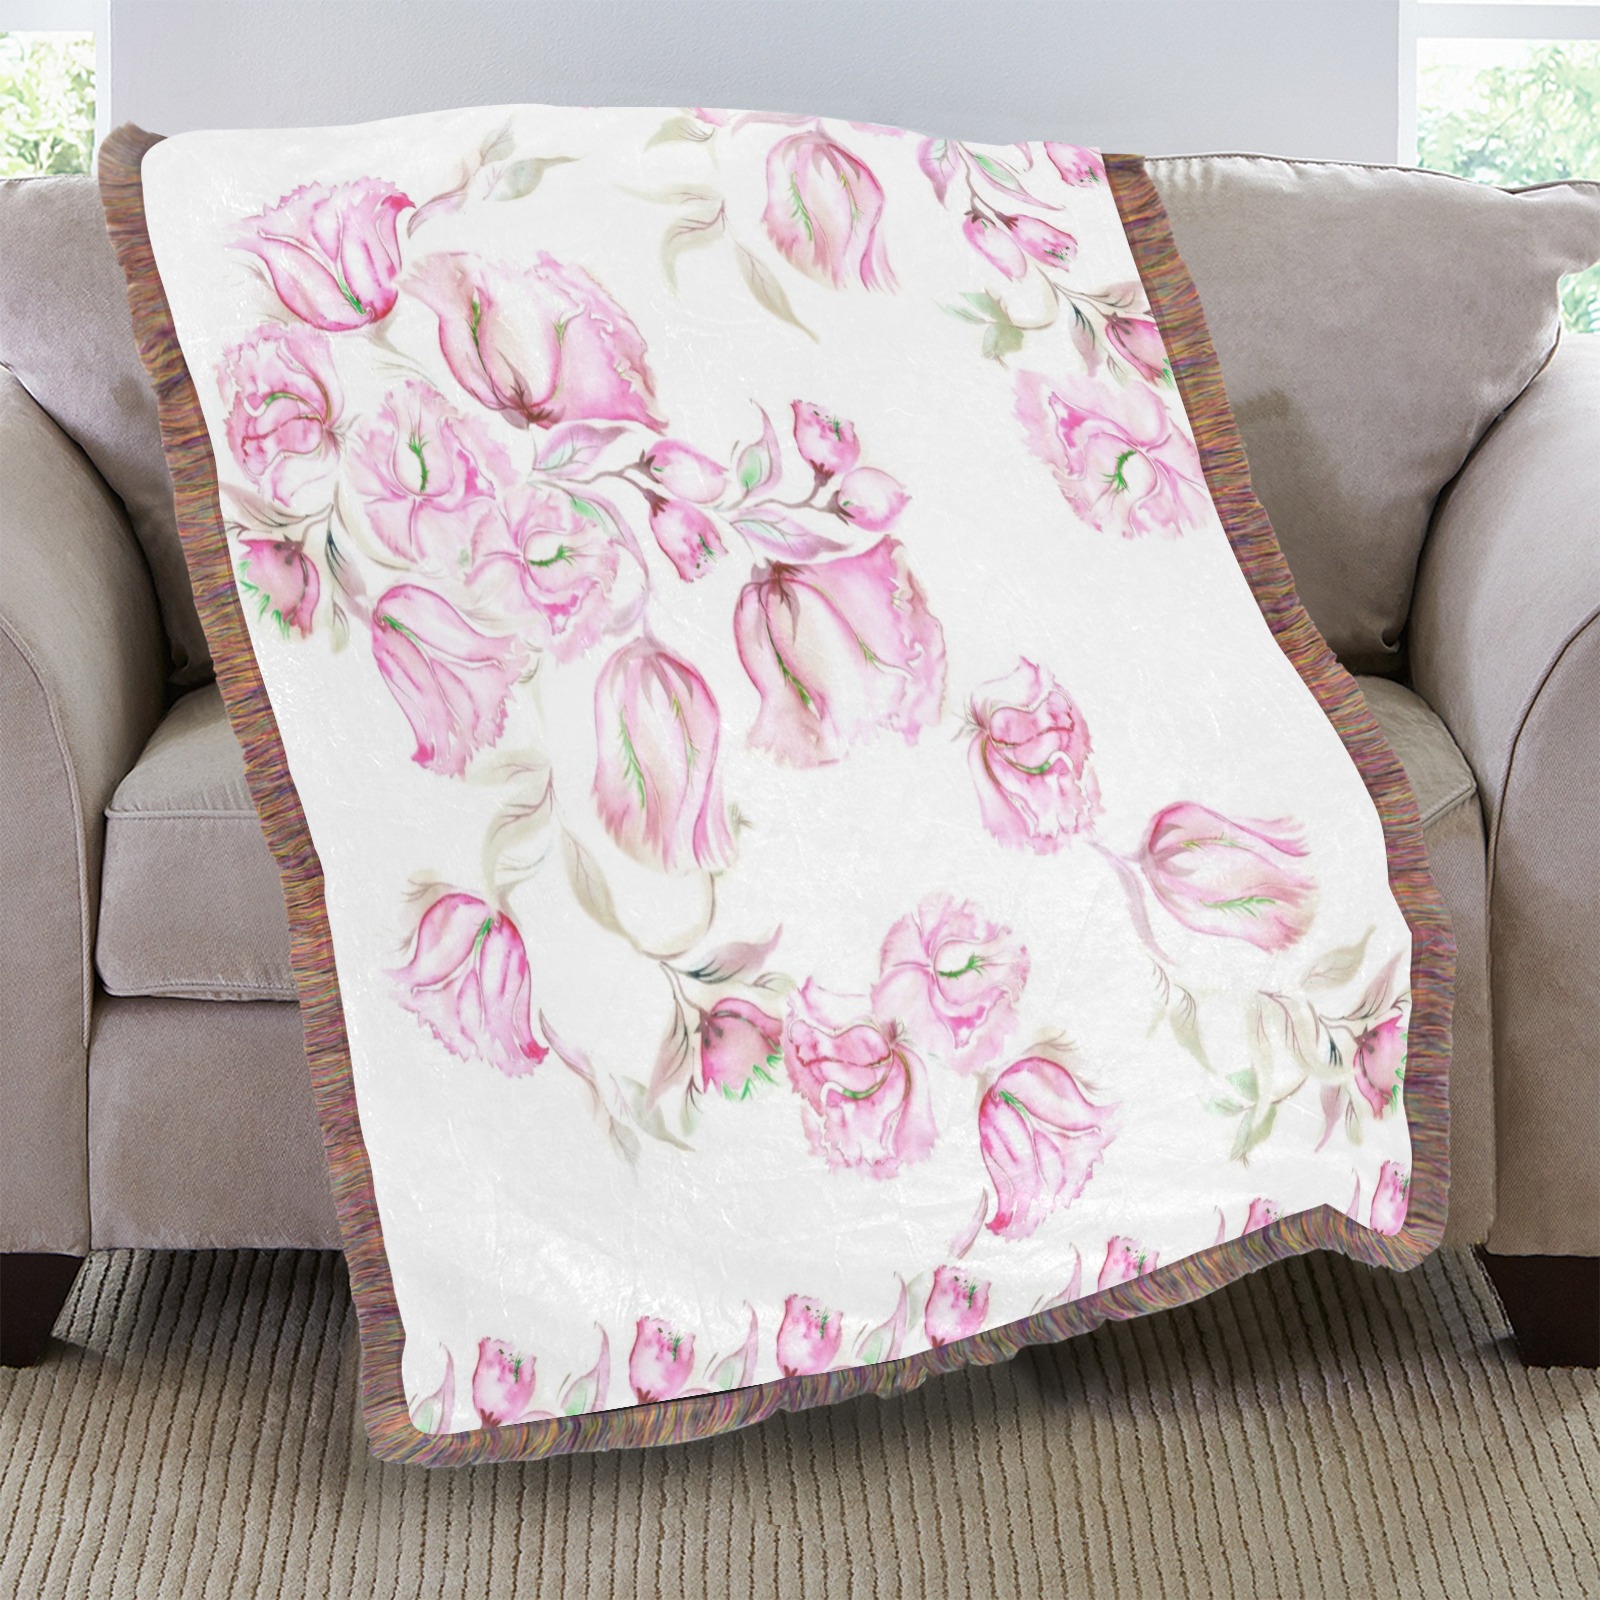 Chinese Peonies 3 Ultra-Soft Fringe Blanket 30"x40" (Mixed Green)